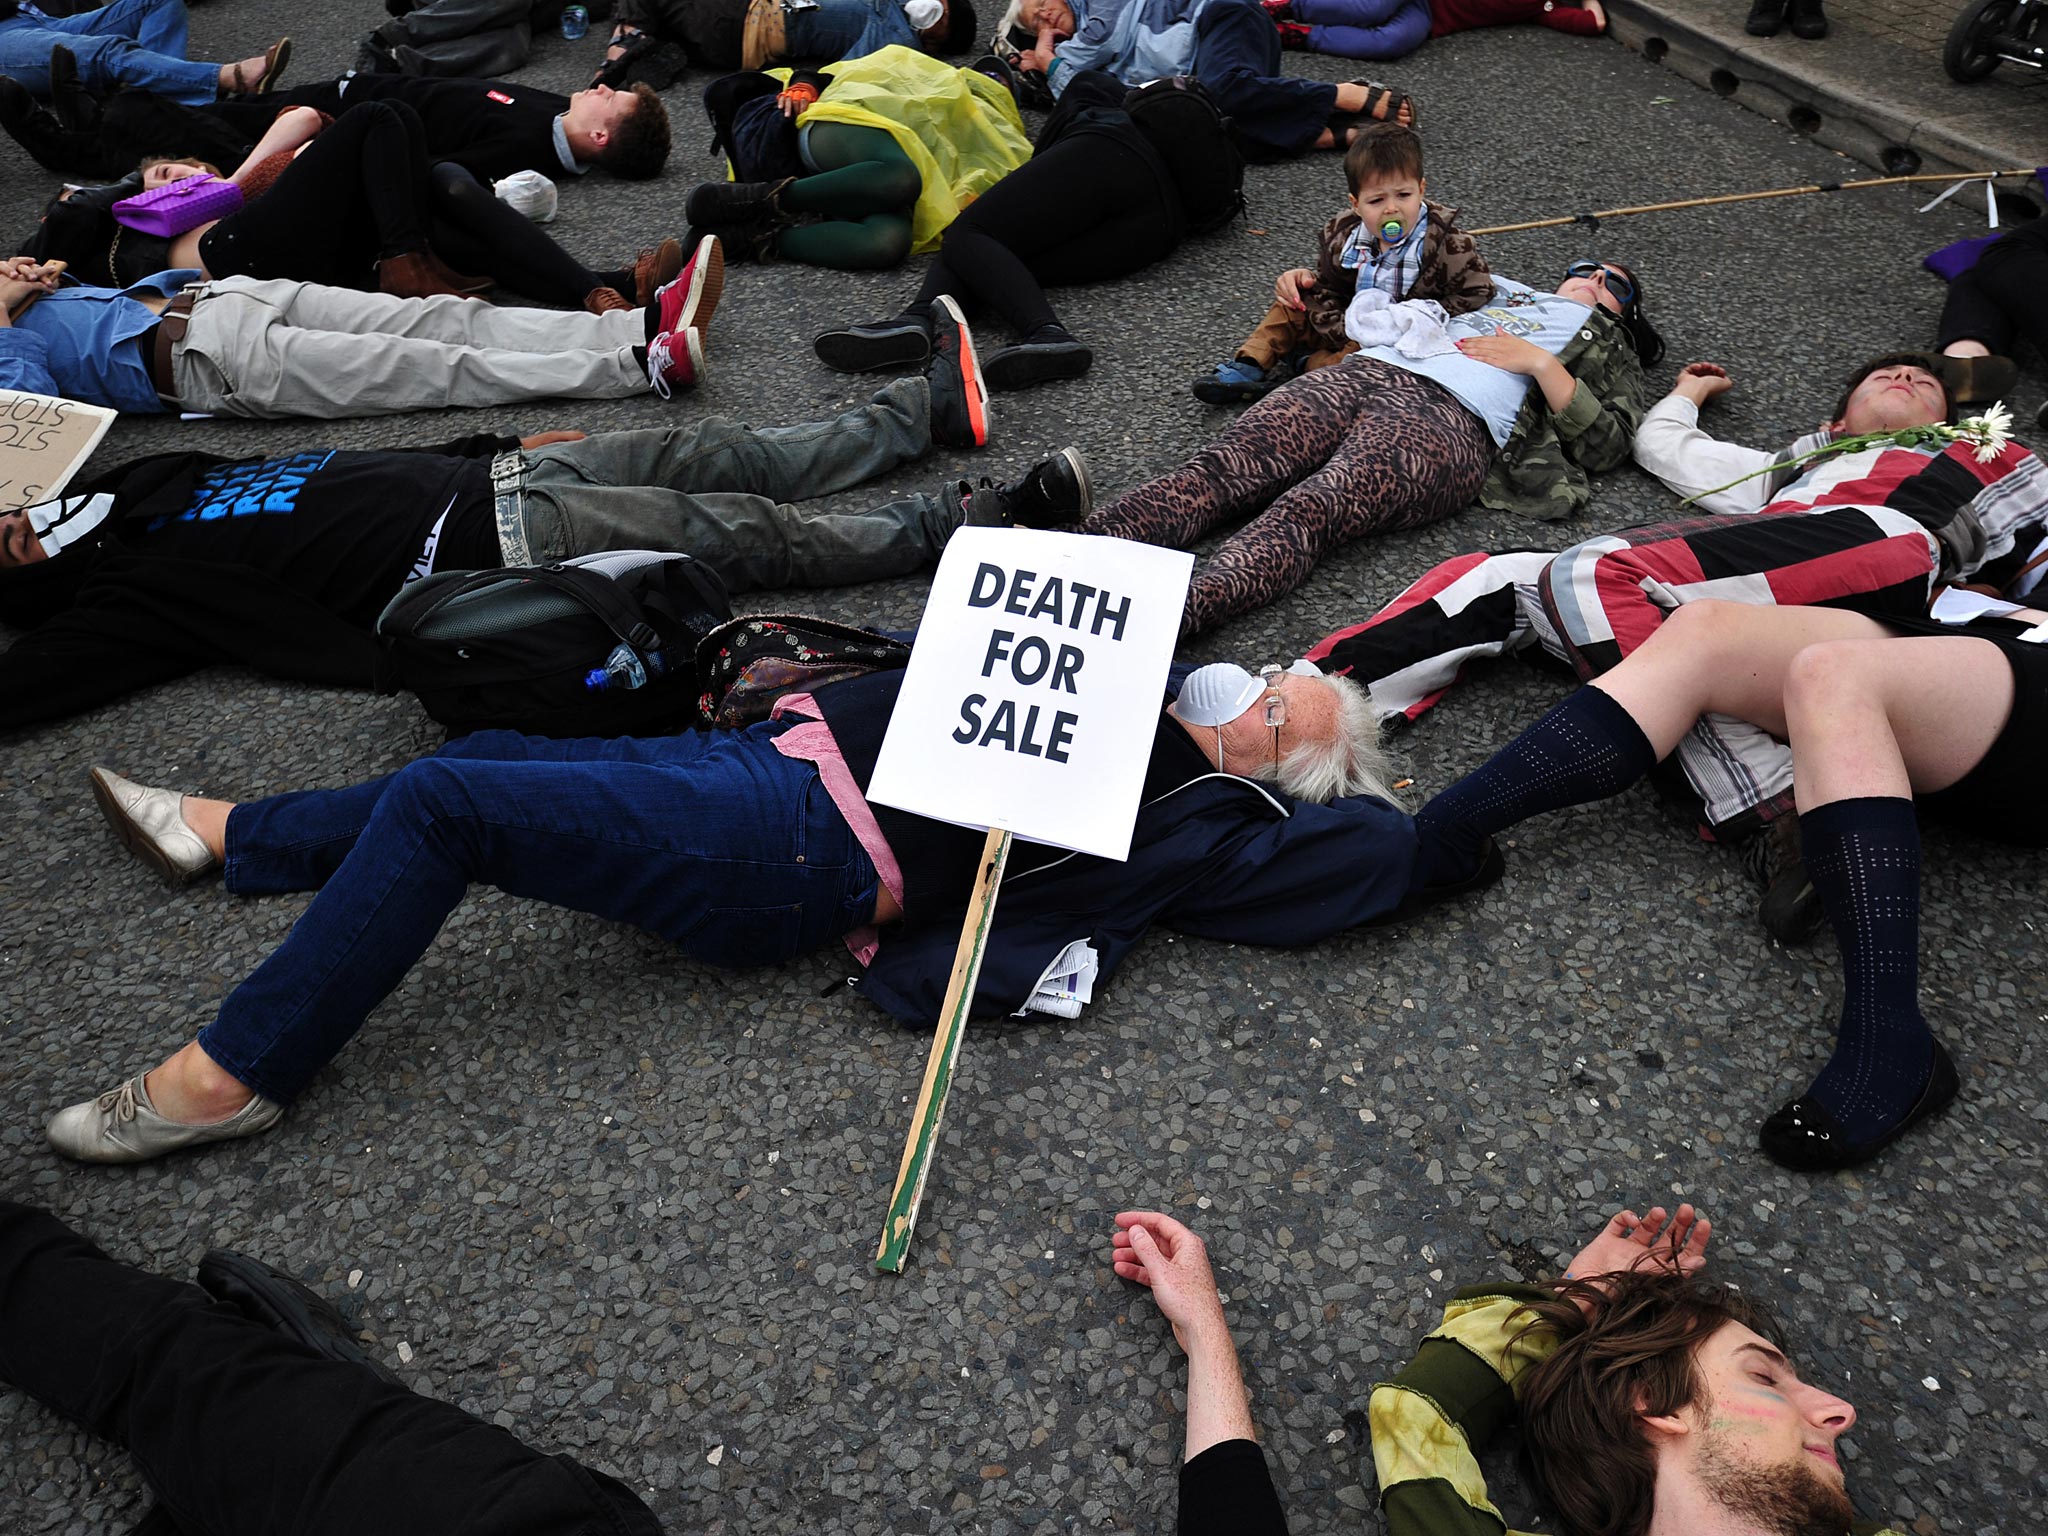 Protestors lie in the road during a demonstration against an arms fair at the ExCeL Centre back in September last year